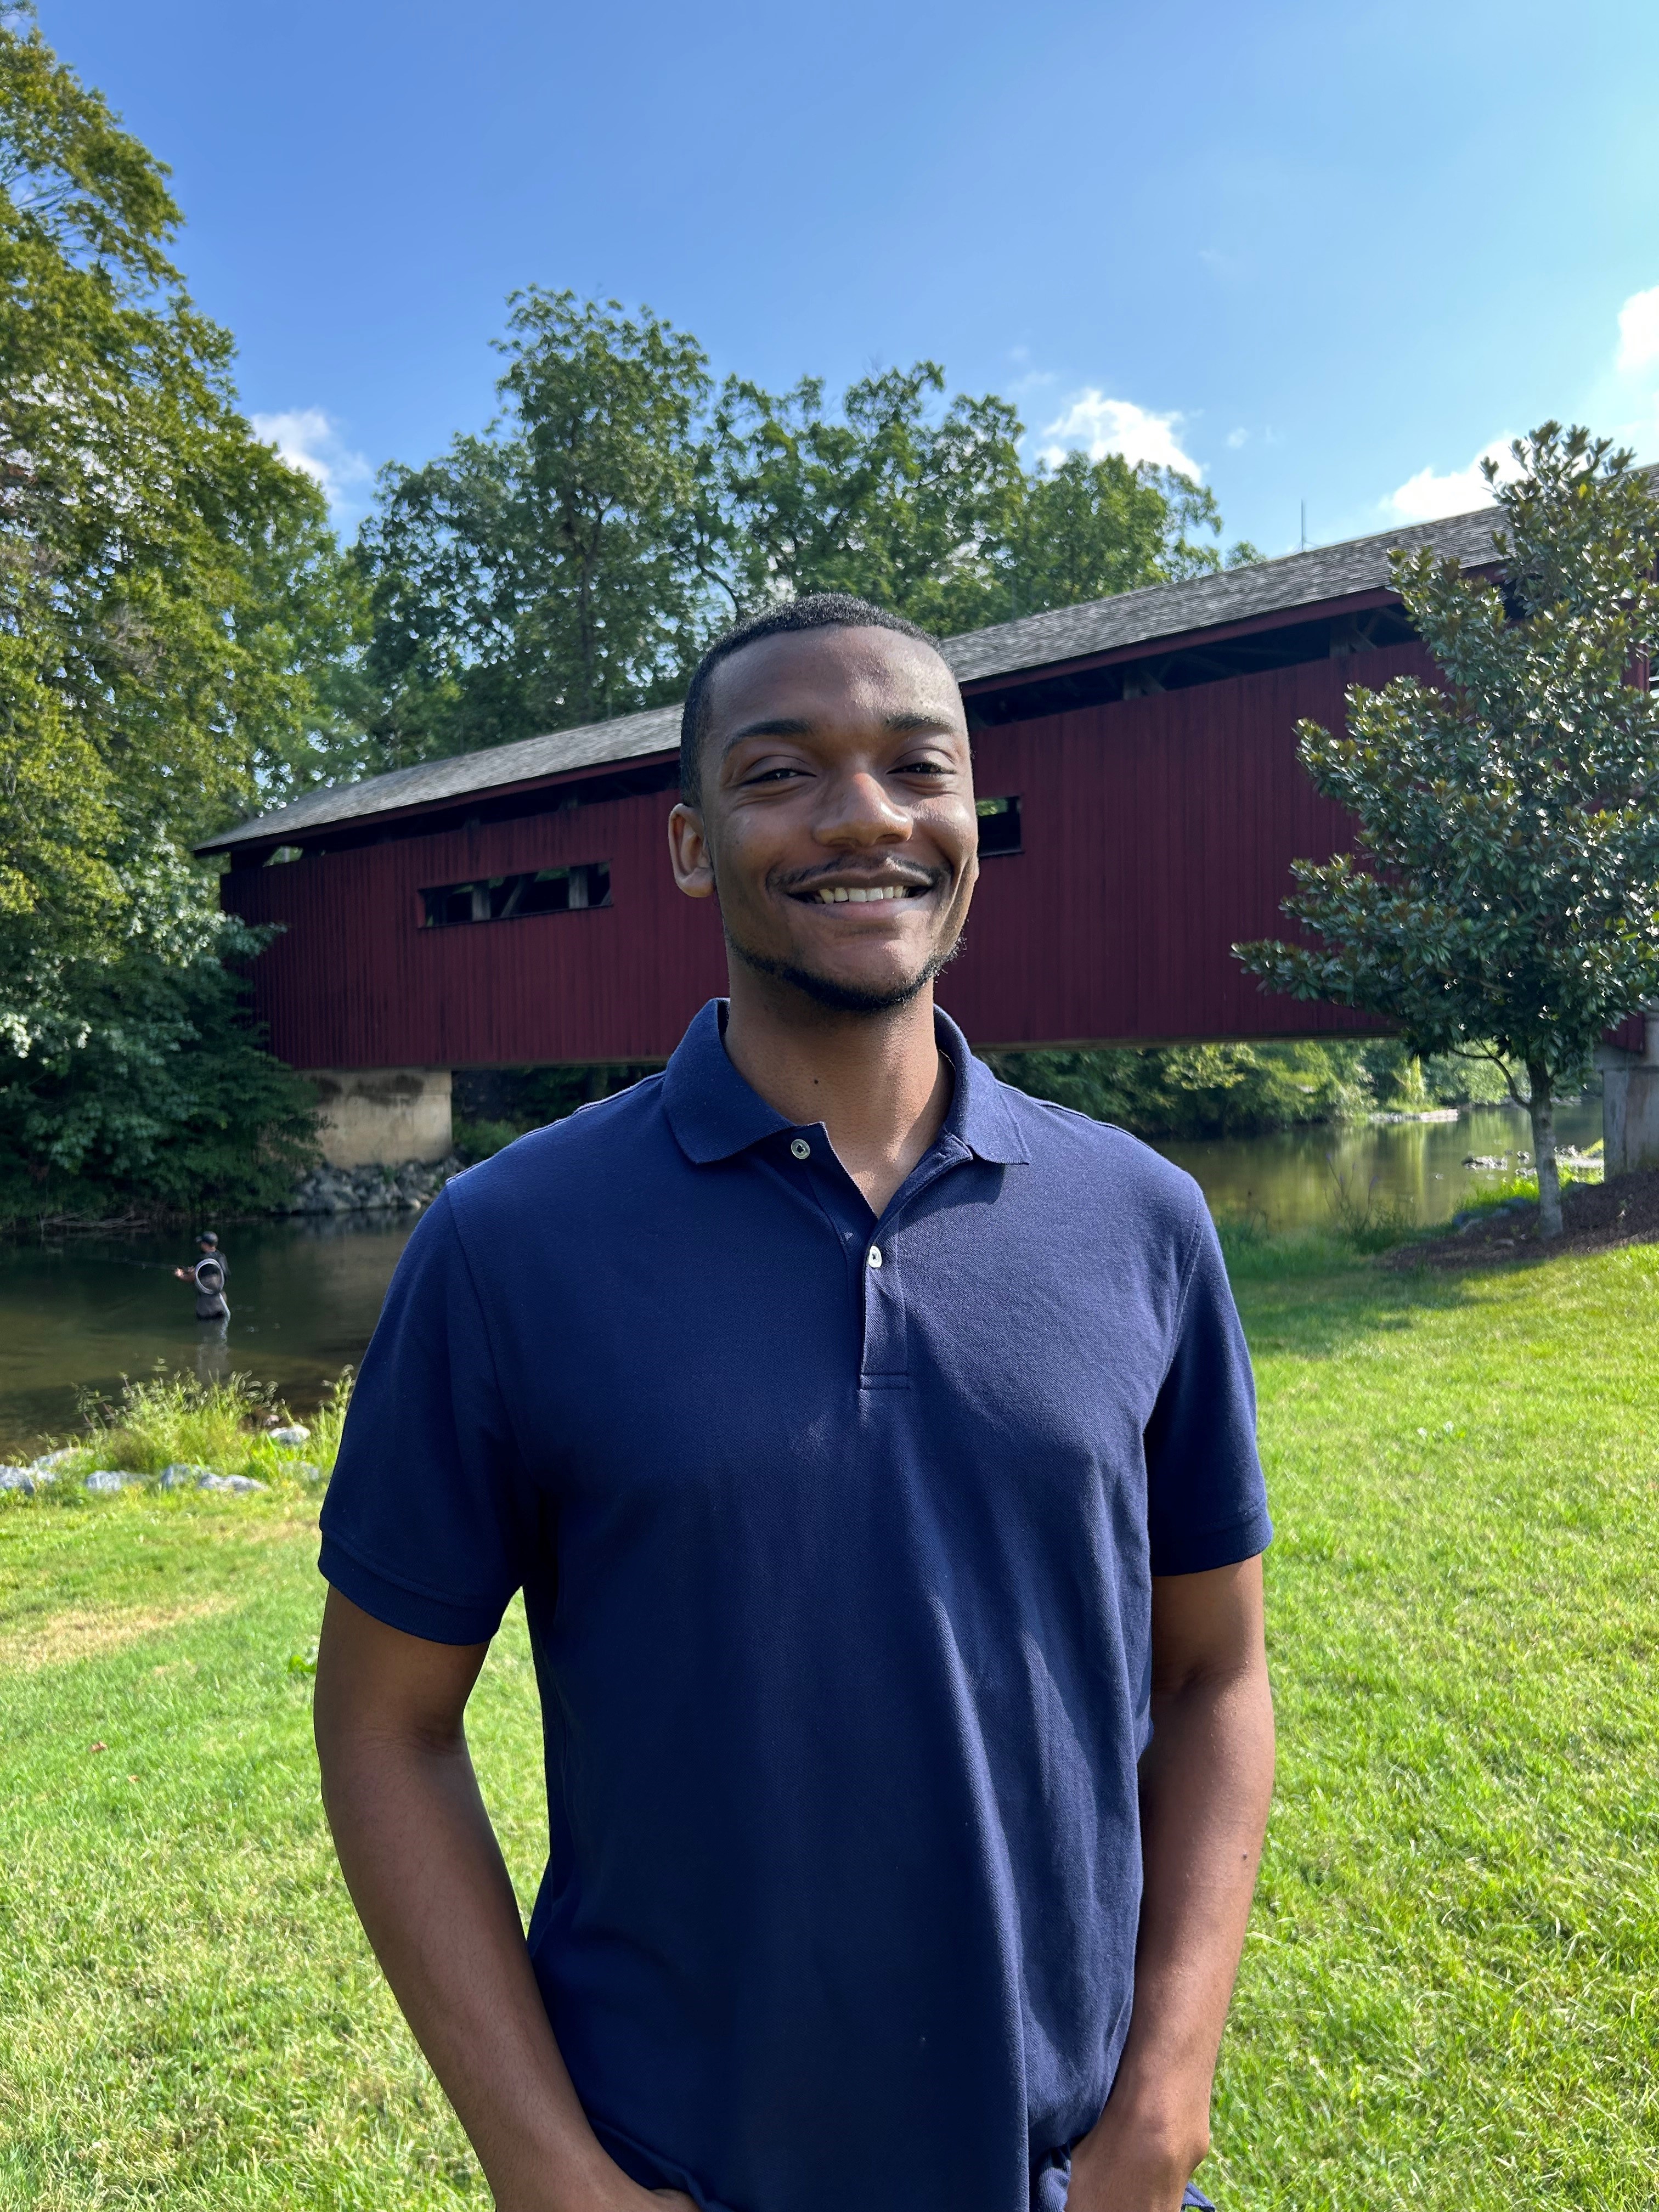 Man standing in front of covered bridge, smiling